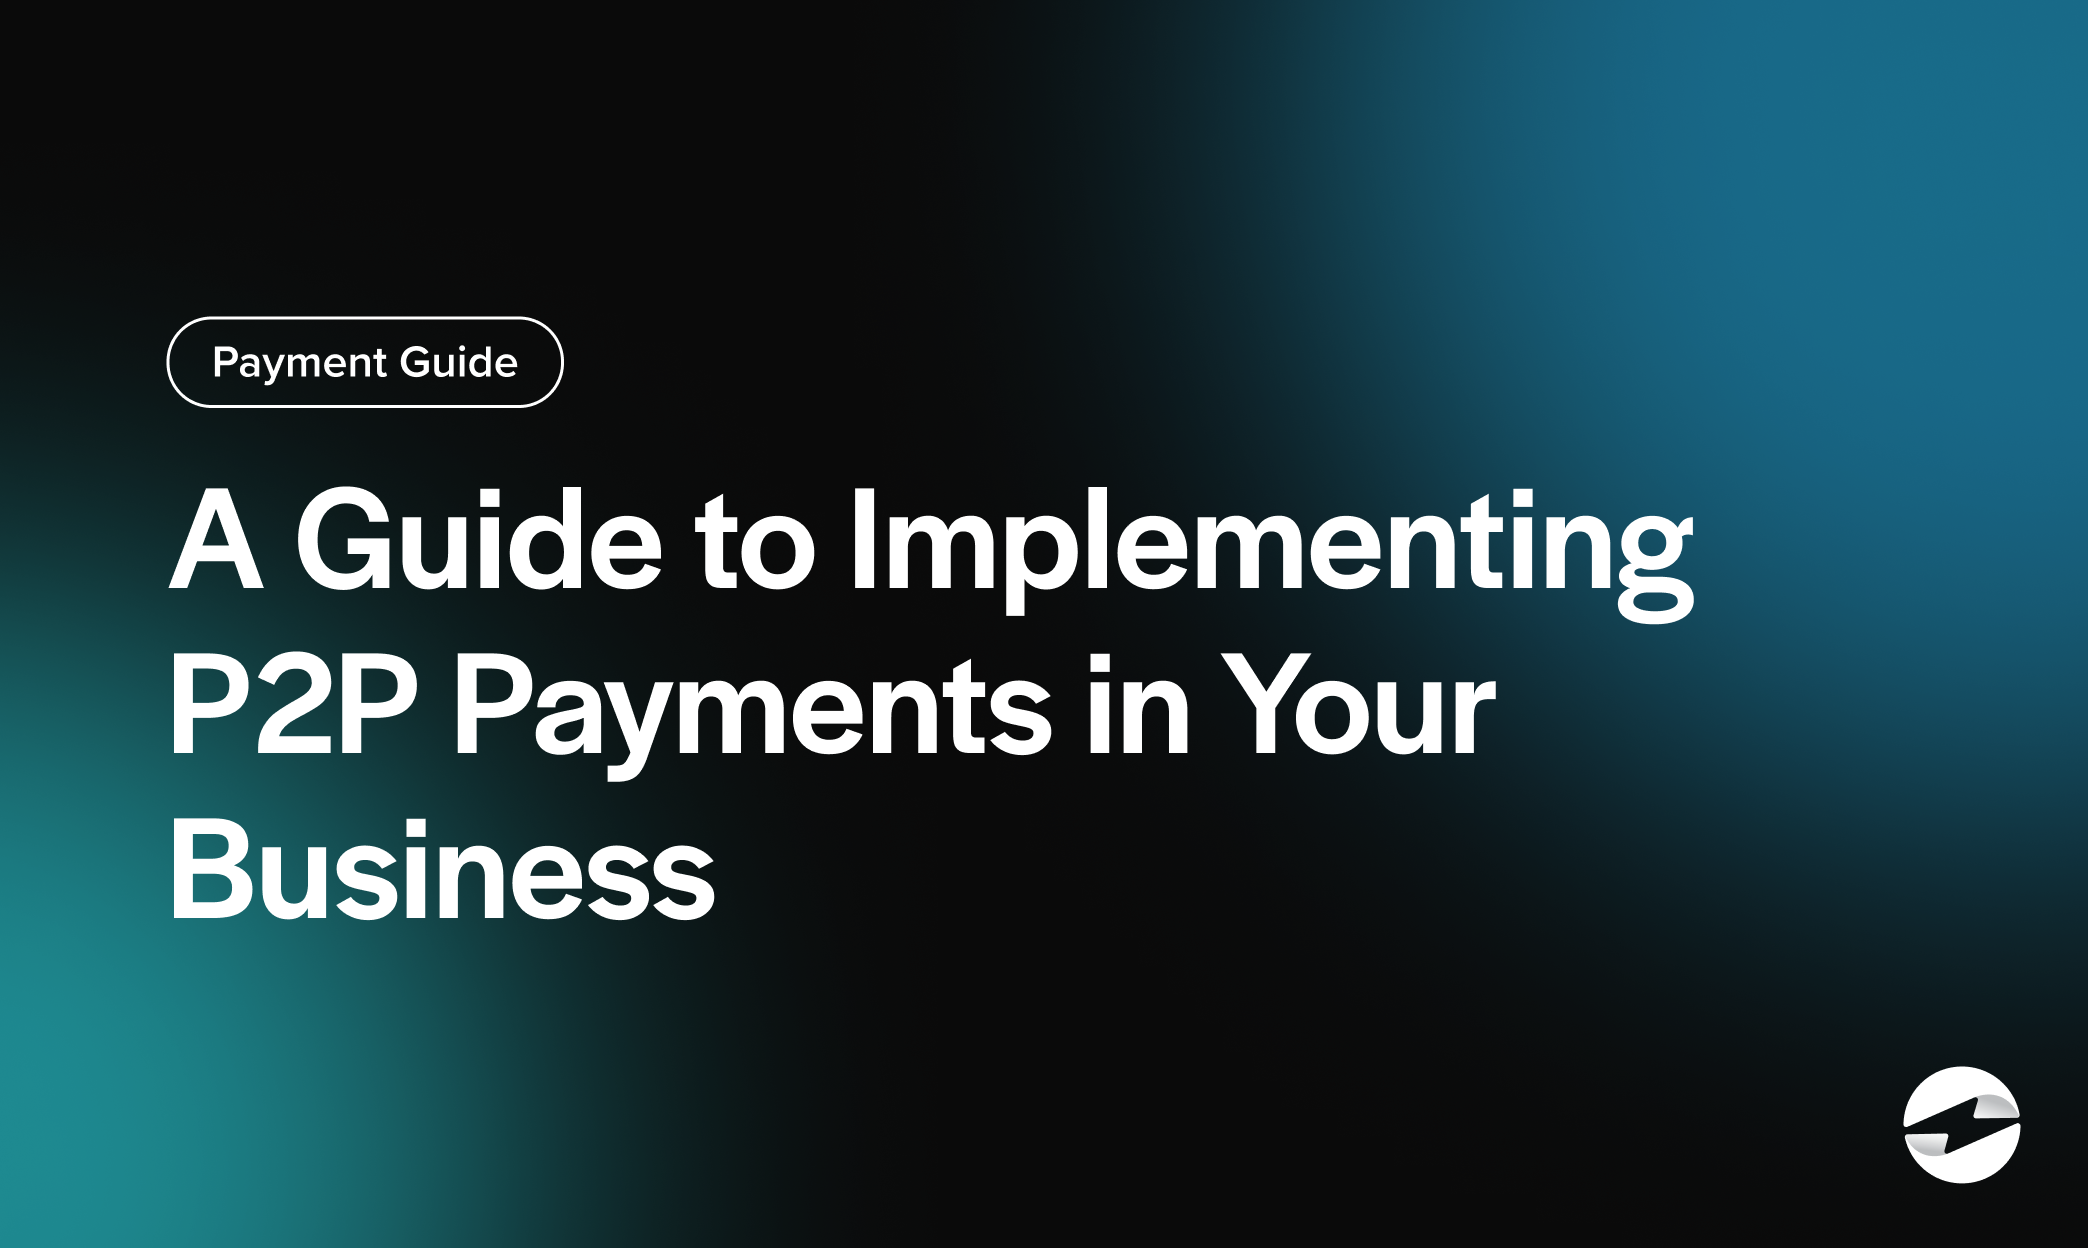 A Guide to Implementing P2P Payments in Your Business